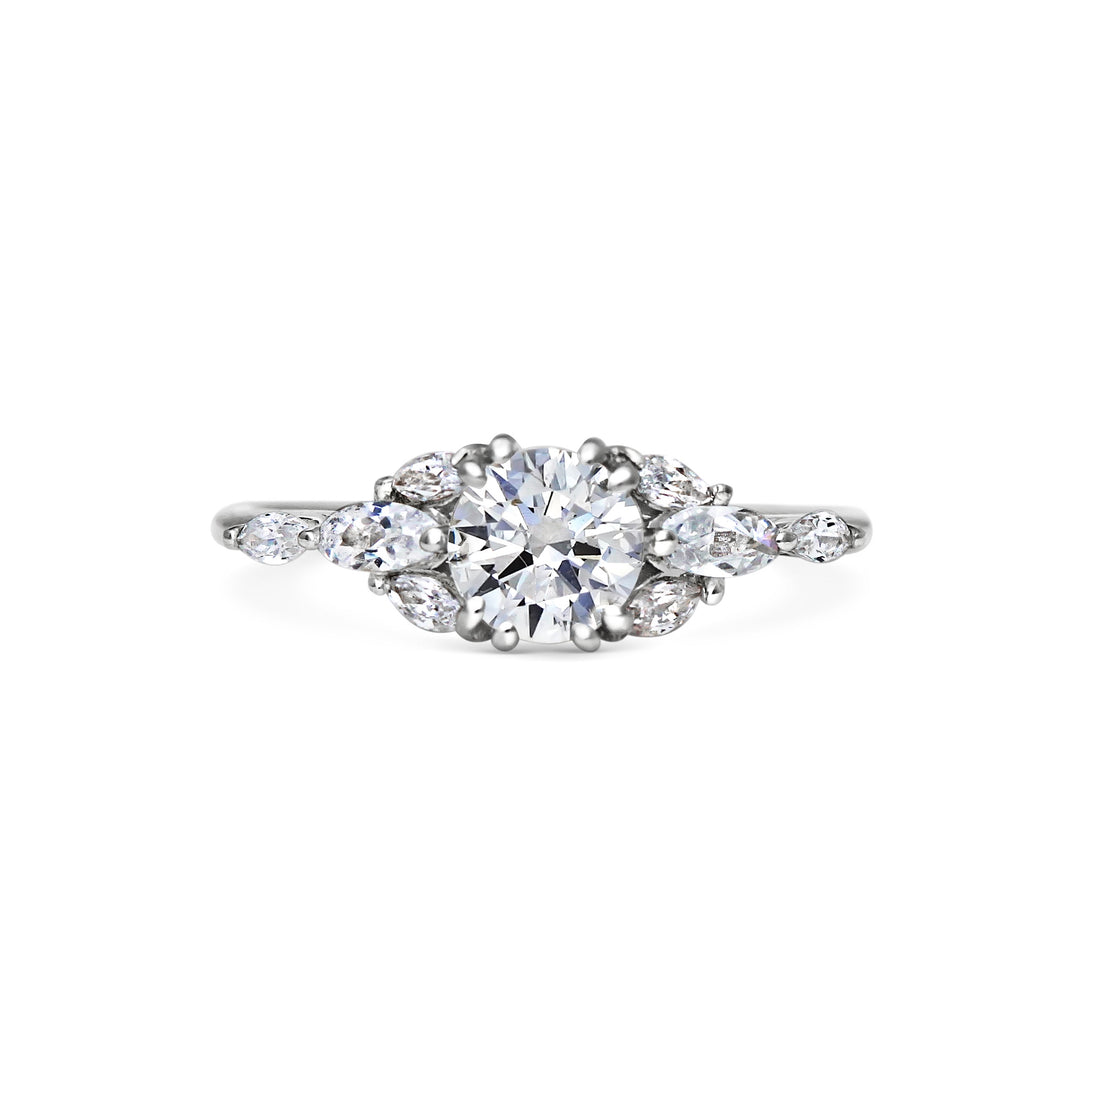  Signature Diamond Engagement Ring by Michelle Oh | The Cut London